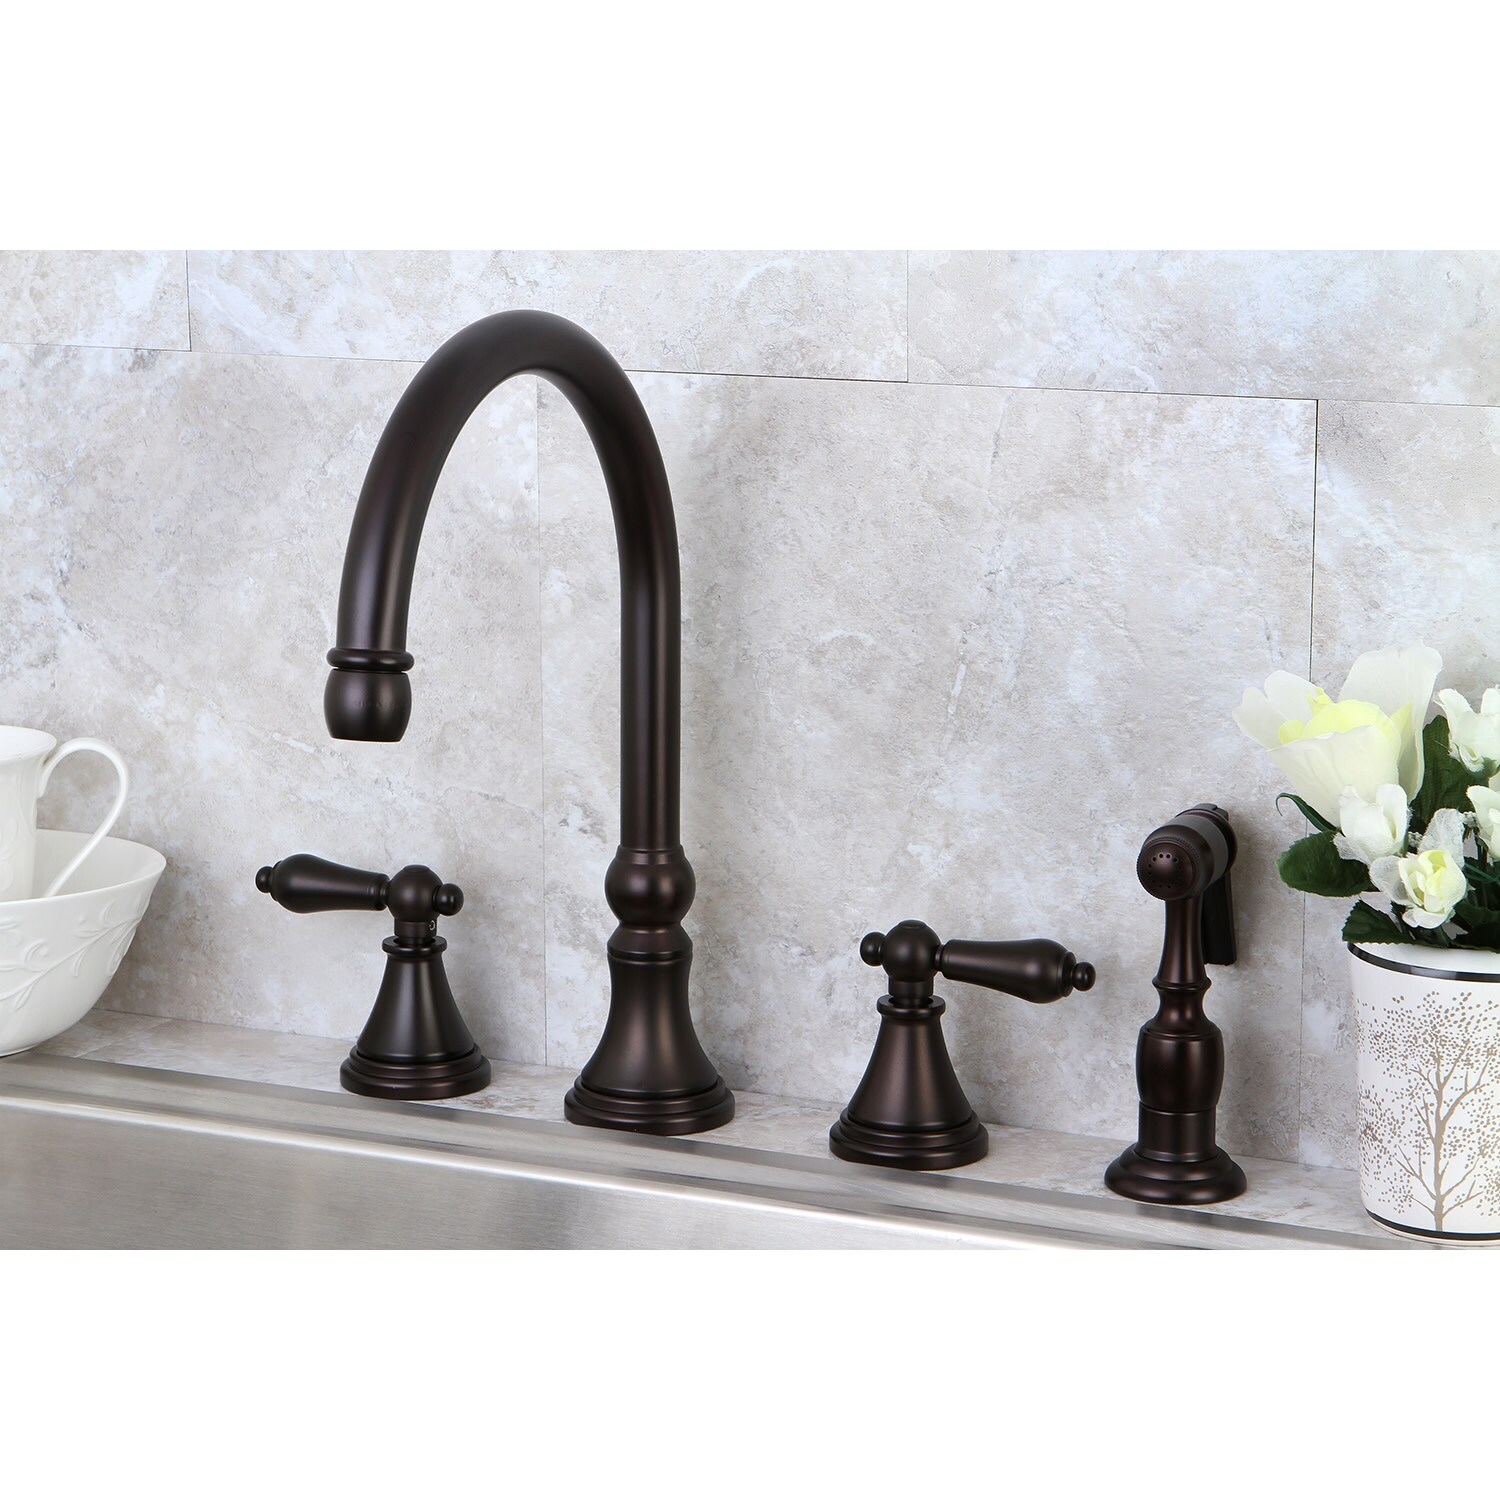 Governor Widespread Kitchen Faucet